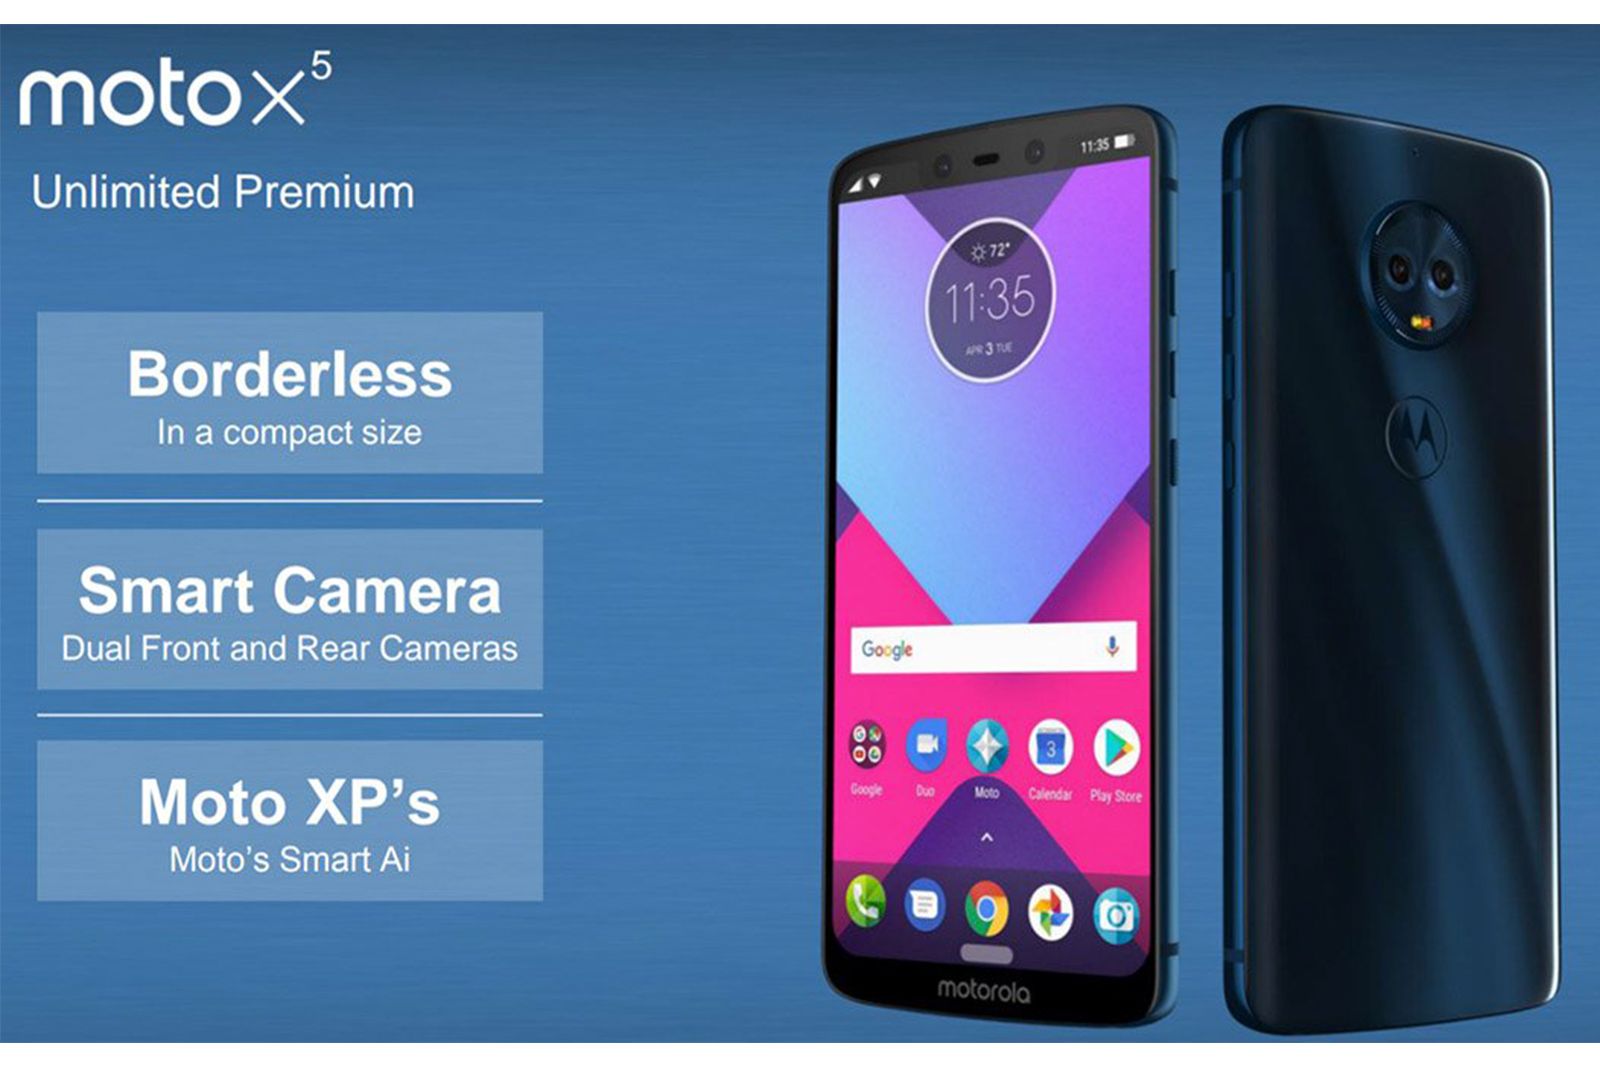 Motorola Moto X5 leaks with dual front and rear cameras image 1